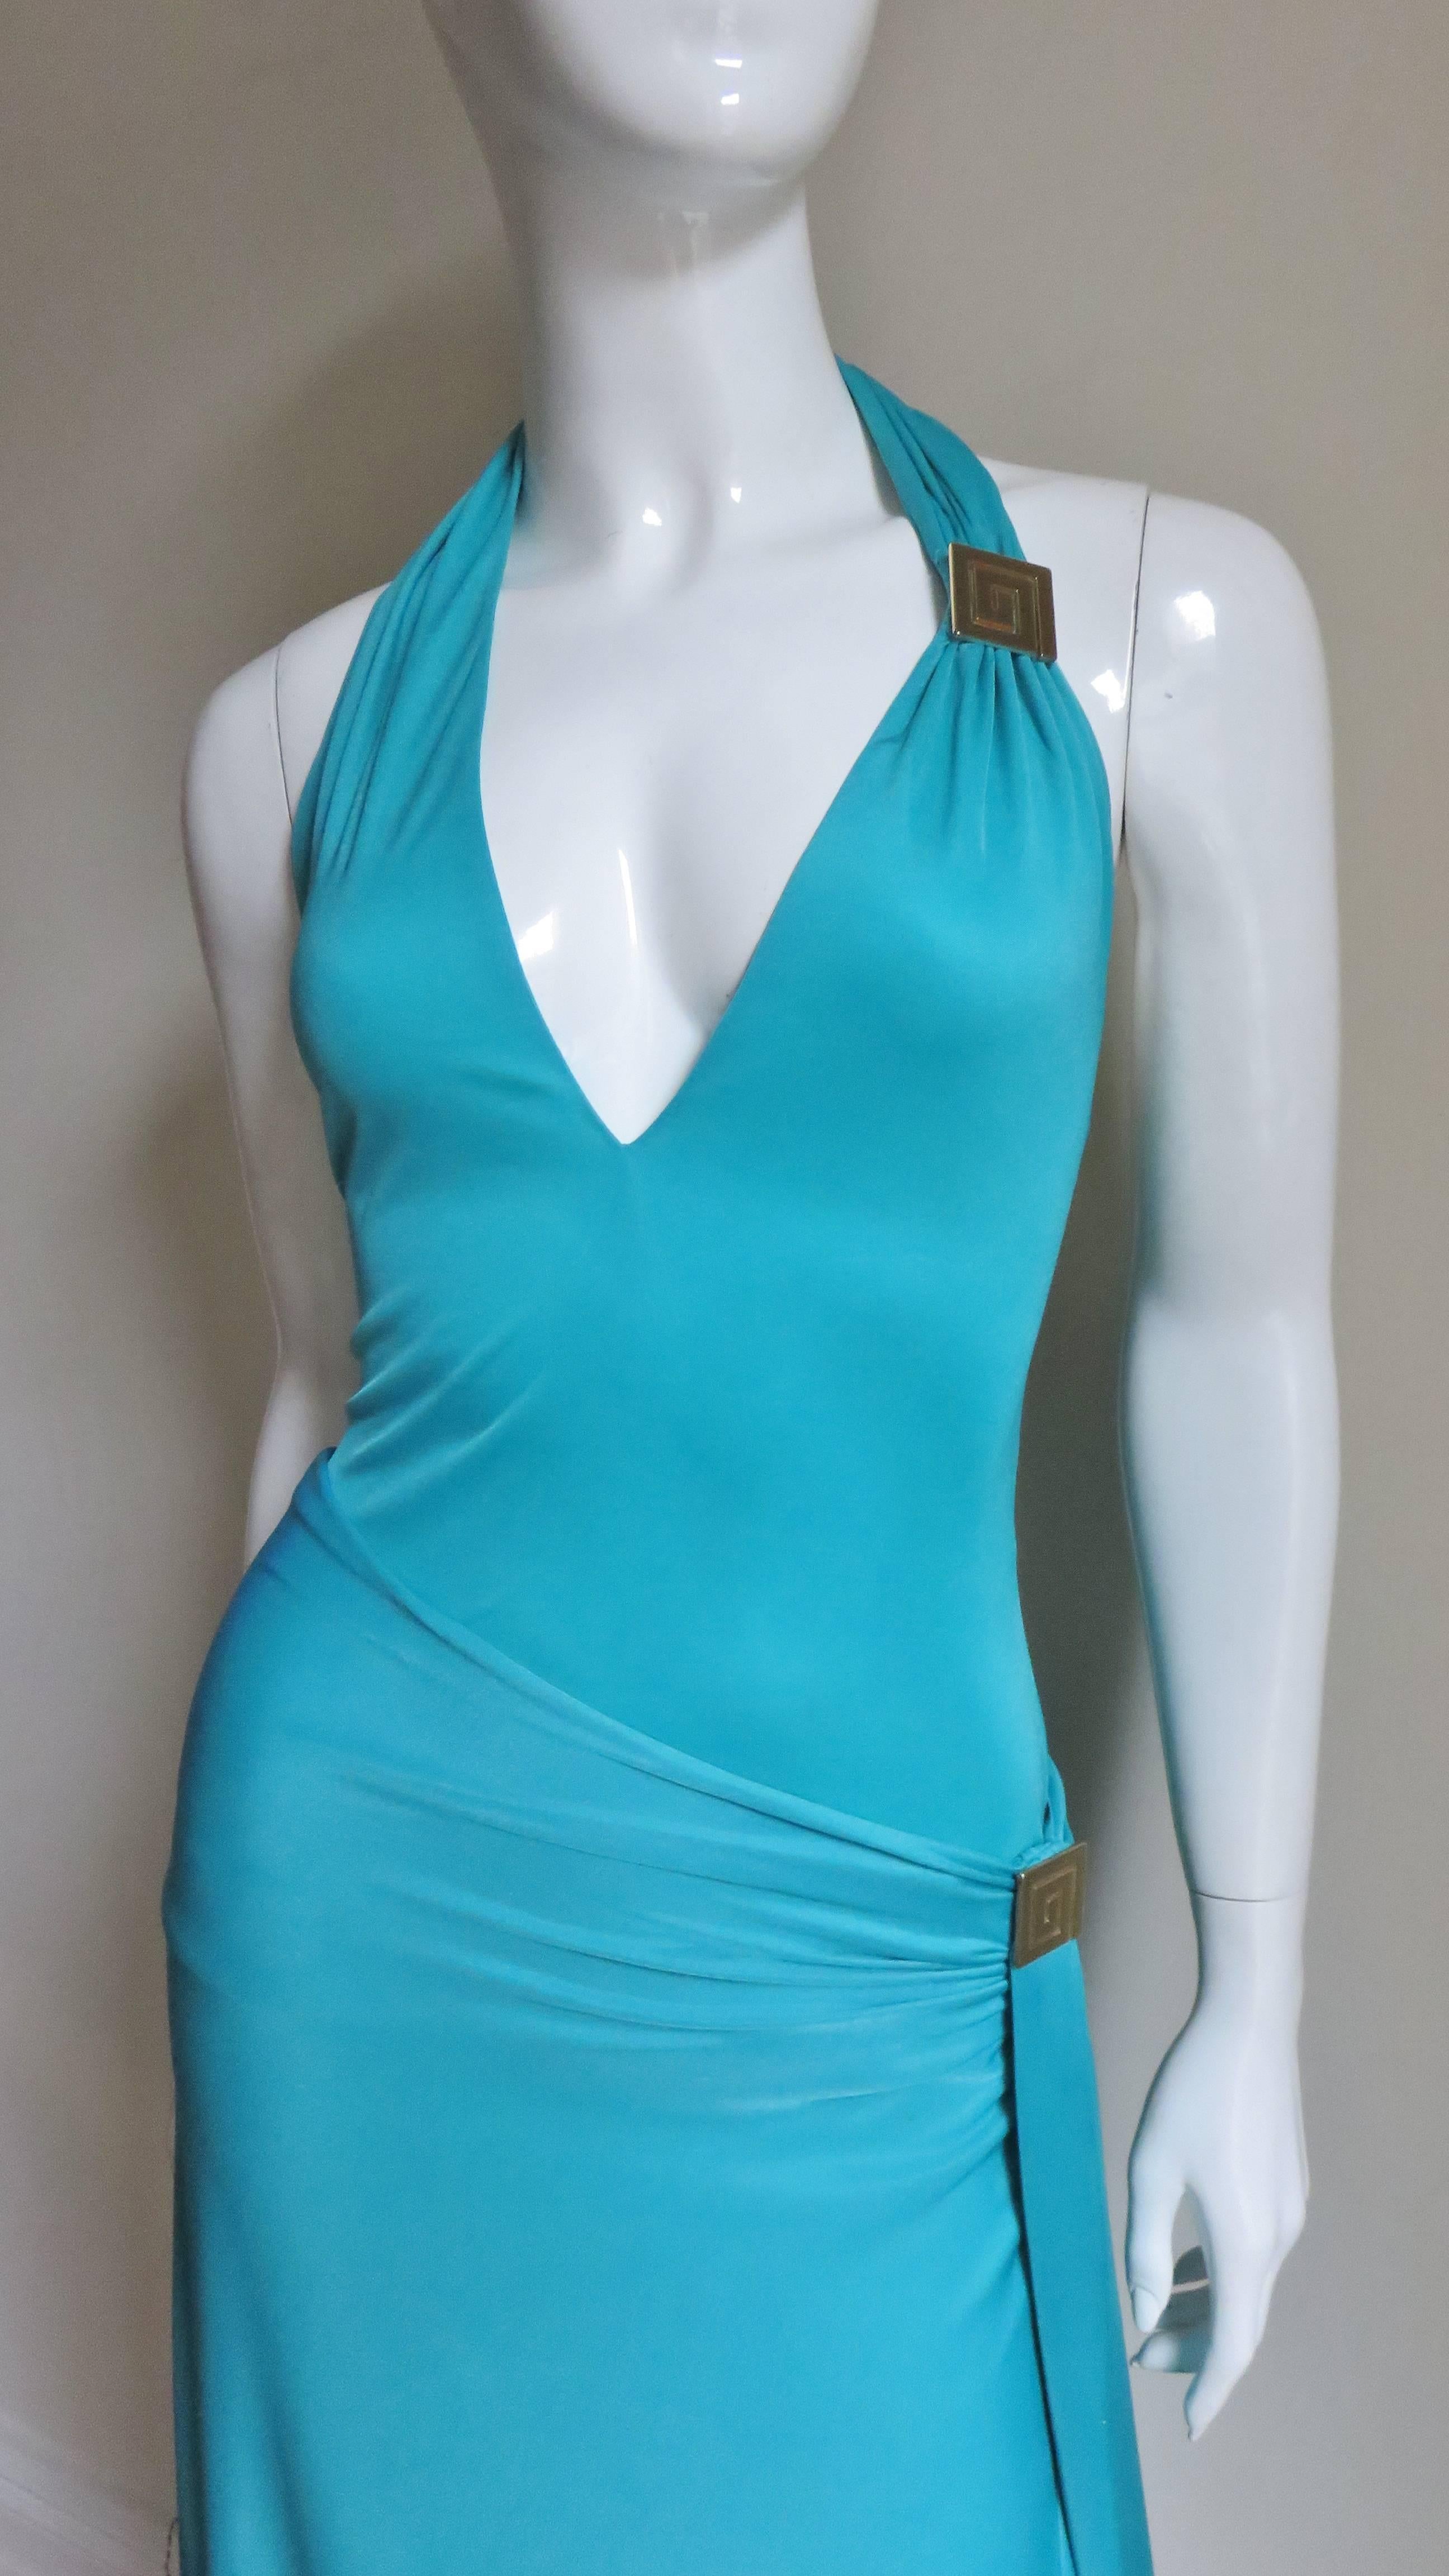 A fabulous turquoise silk jersey 2 piece halter dress from Gianni Versace.  The top has a plunging halter neckline.  The skirt drapes to the left side with a slit.  Both are adorned with a Versace insignia gold hardware Greek Keys, at the hip on one